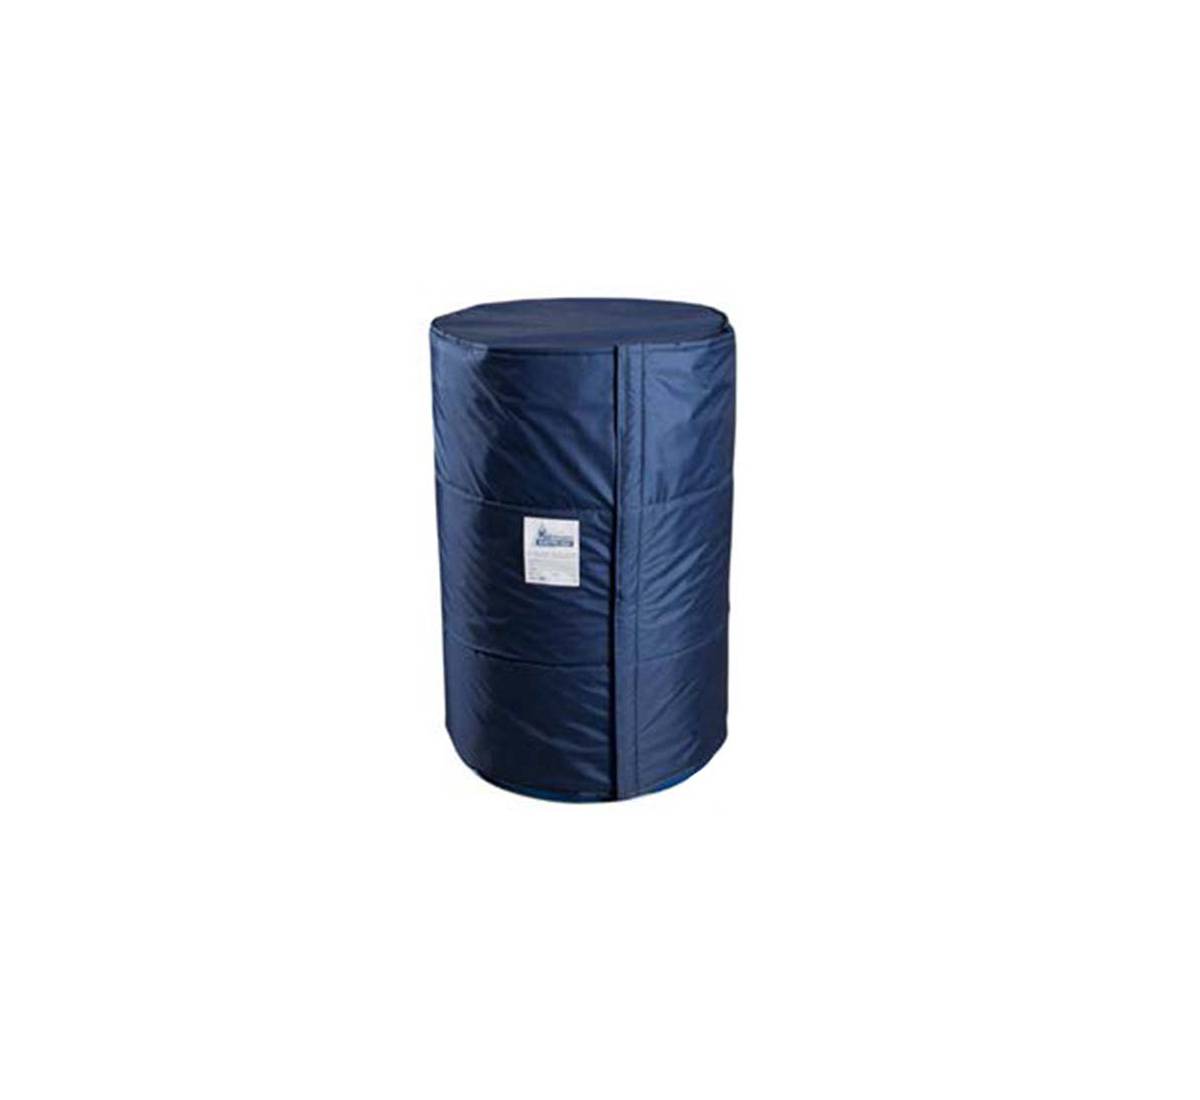 A picture of an Insulation cover for drum heater with casing of nylon and polyester insulation